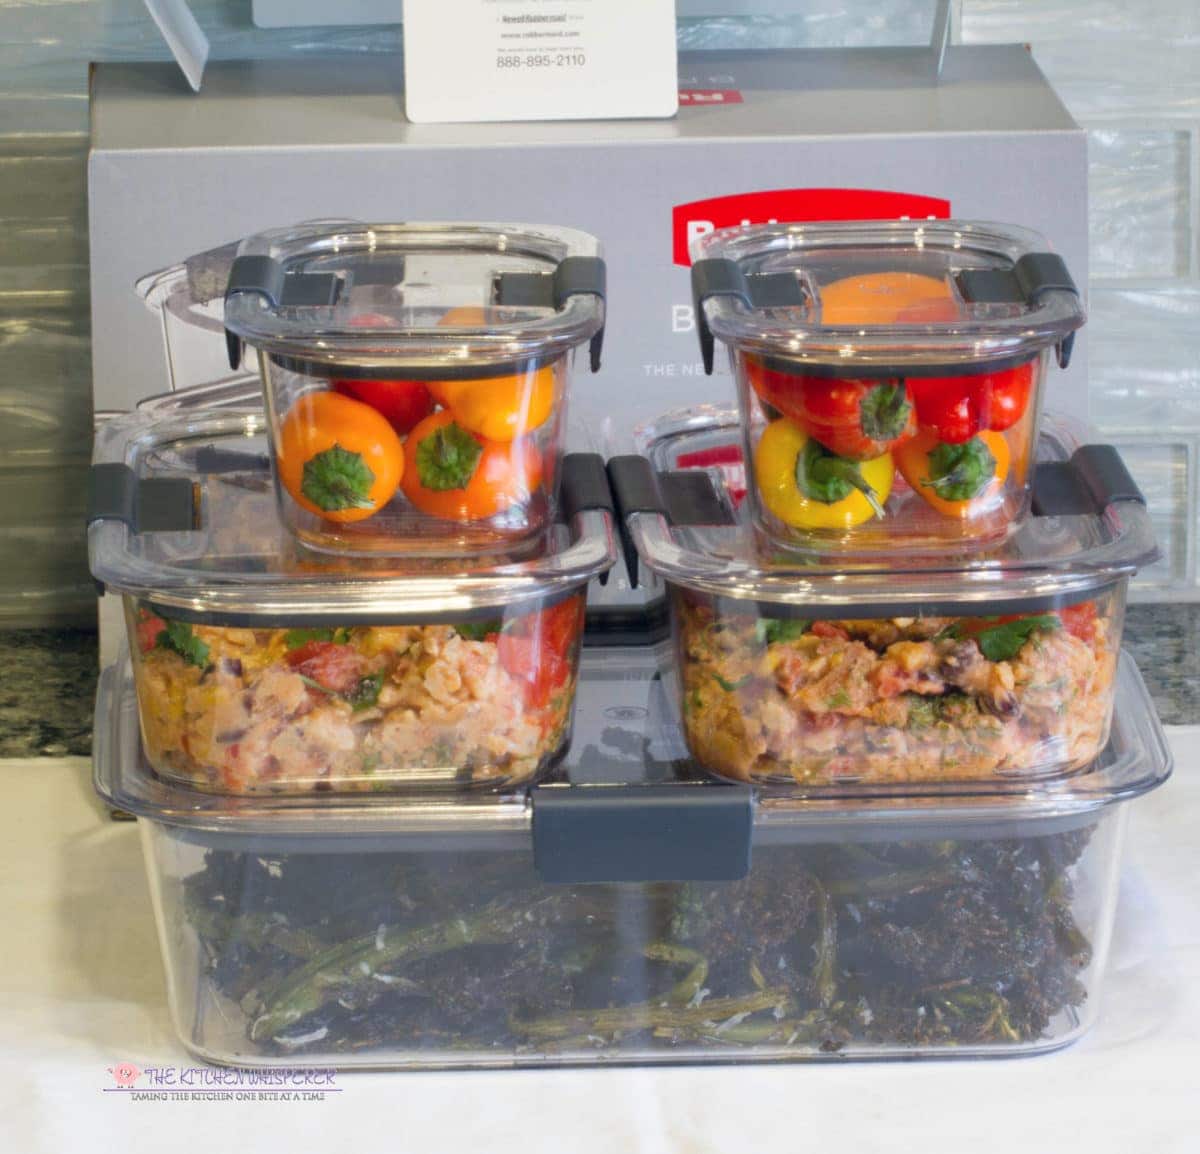 Meal Prep with Rubbermaid - Zheelicious meal prepping made easy.